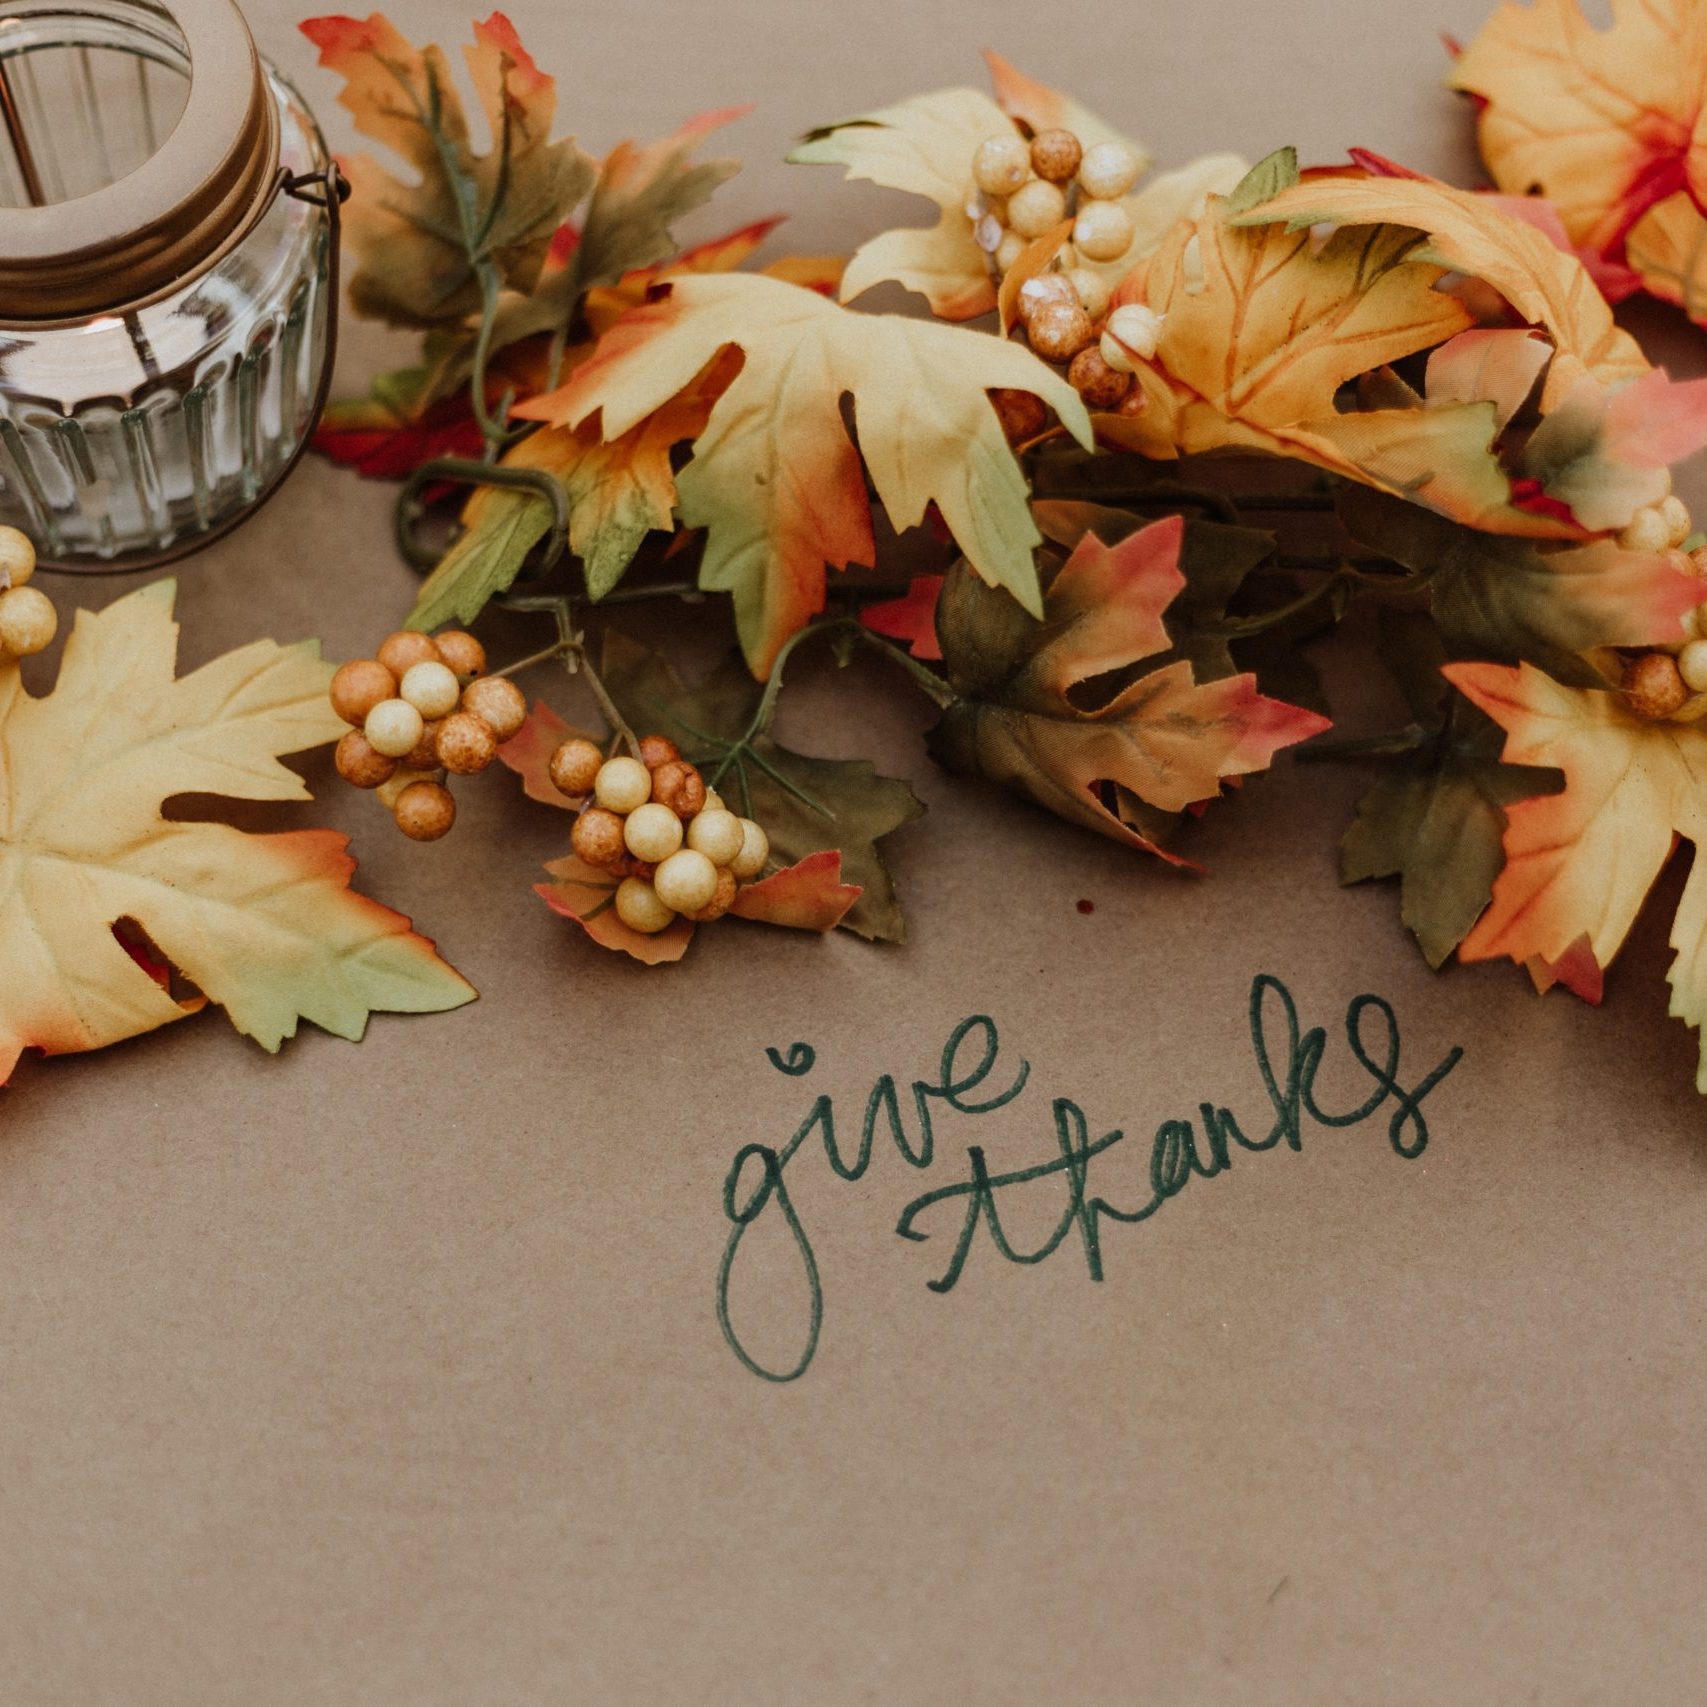 Autumnal image featuring the phrase "Give Thanks," surrounded by leaves and a glowing candle